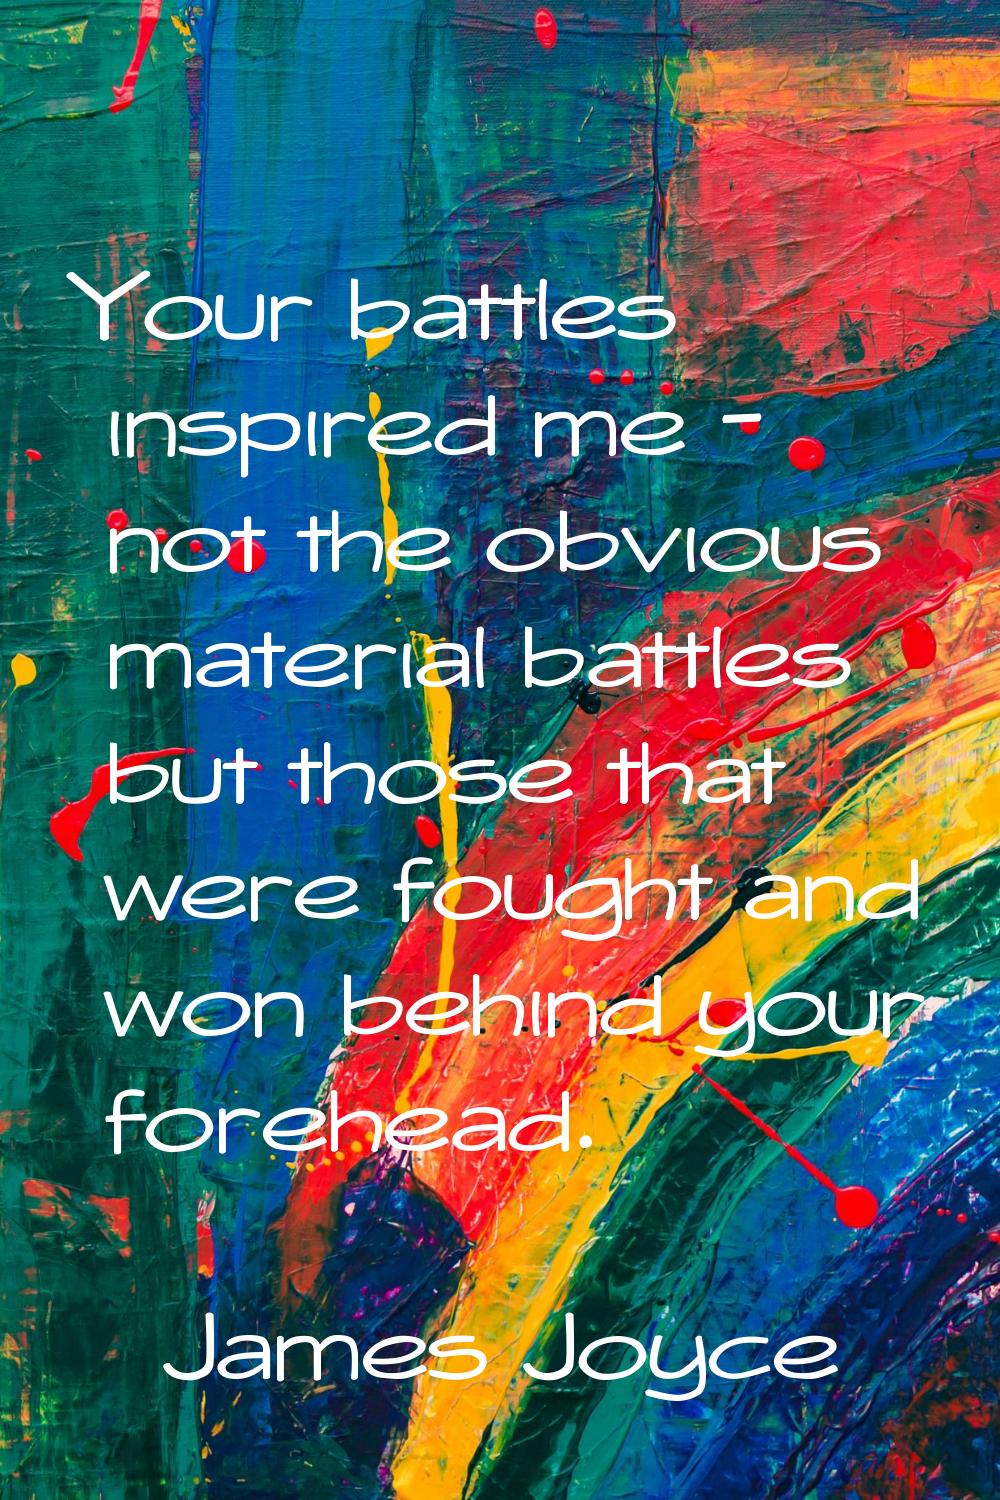 Your battles inspired me - not the obvious material battles but those that were fought and won behi